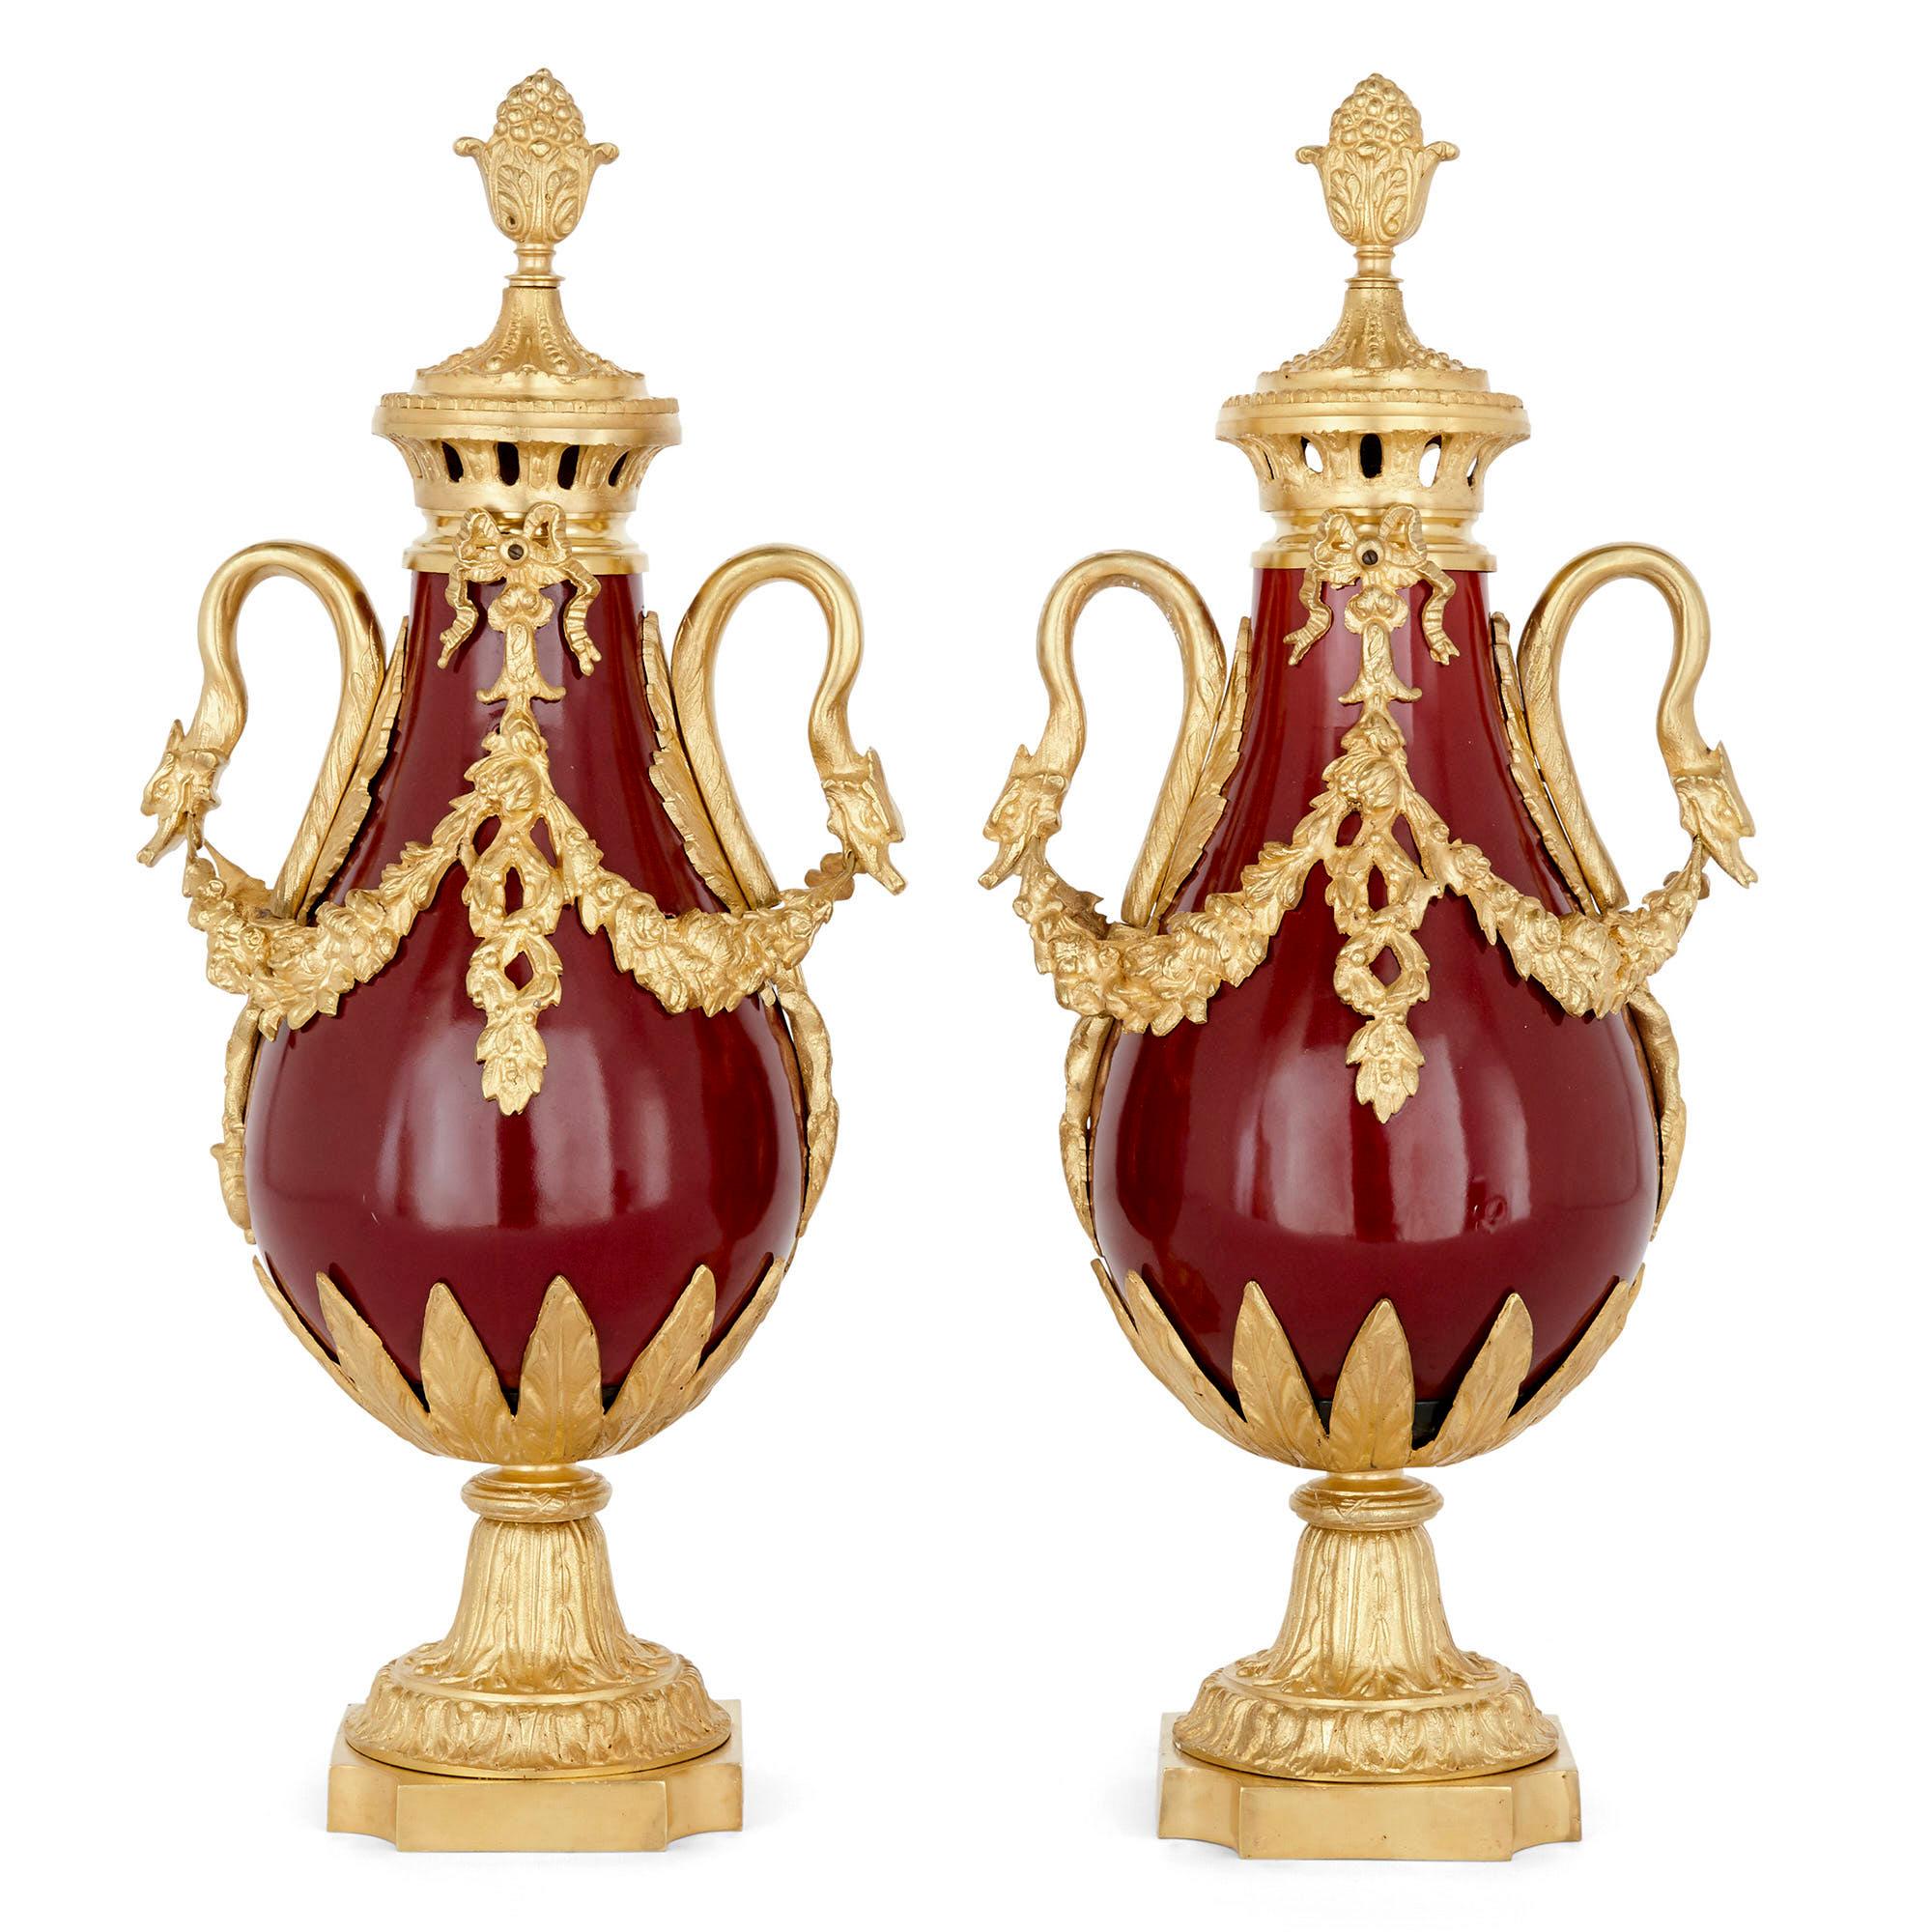 Pair of French Neoclassical style red tôle and gilt bronze vases
French, late 19th Century
Height 53cm, width 24cm, depth 17cm

Each vase in this pair, crafted from gilt bronze mounted red tôle, is baluster shaped in a manner characteristic of